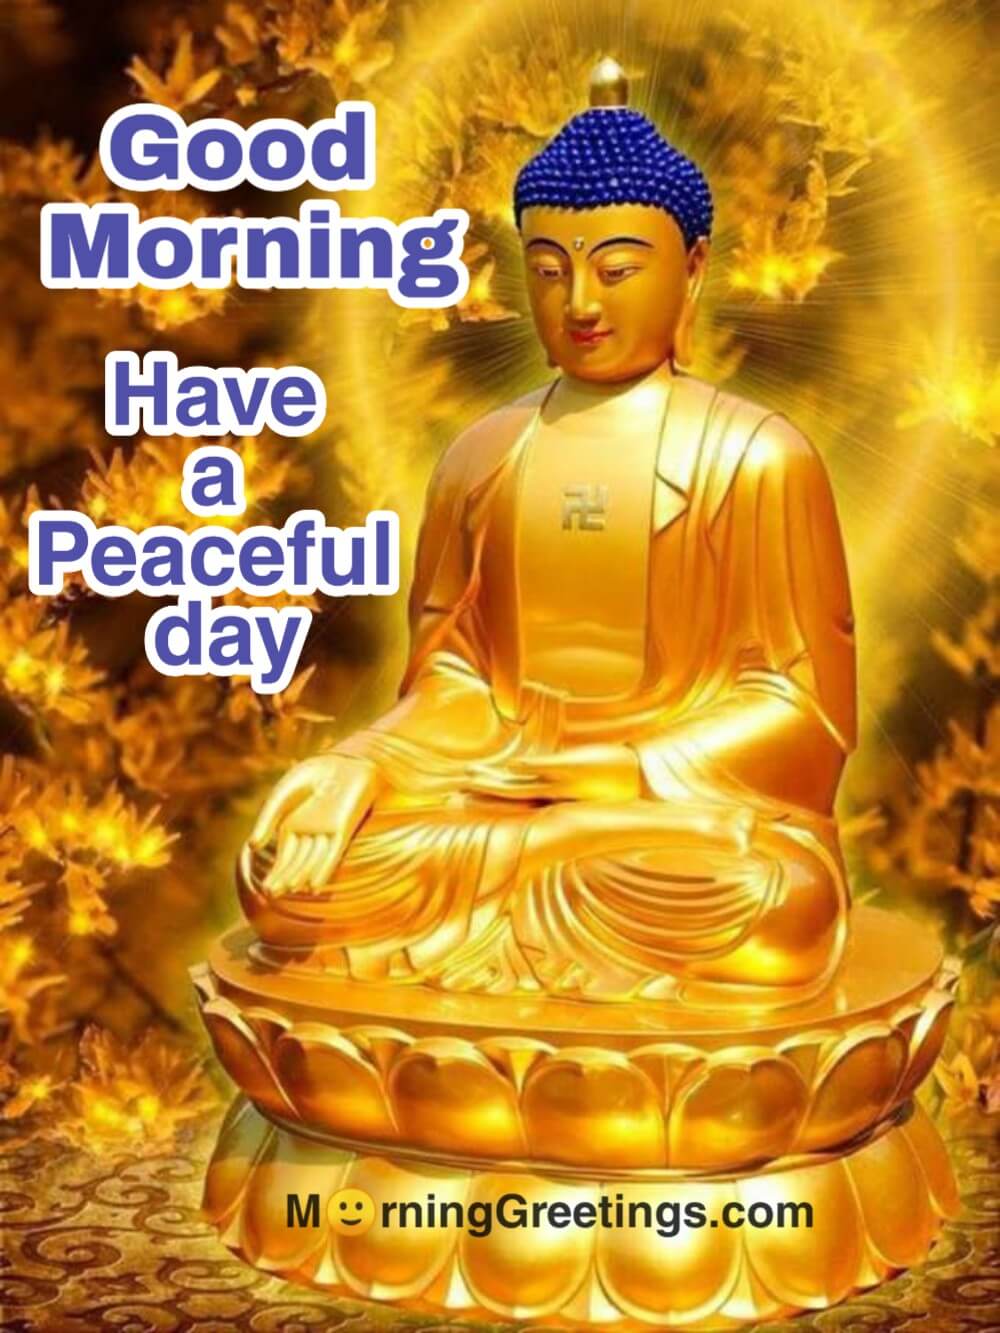 Good Morning Lord Buddha Images – Lord Buddha Blessings & Quotes ...